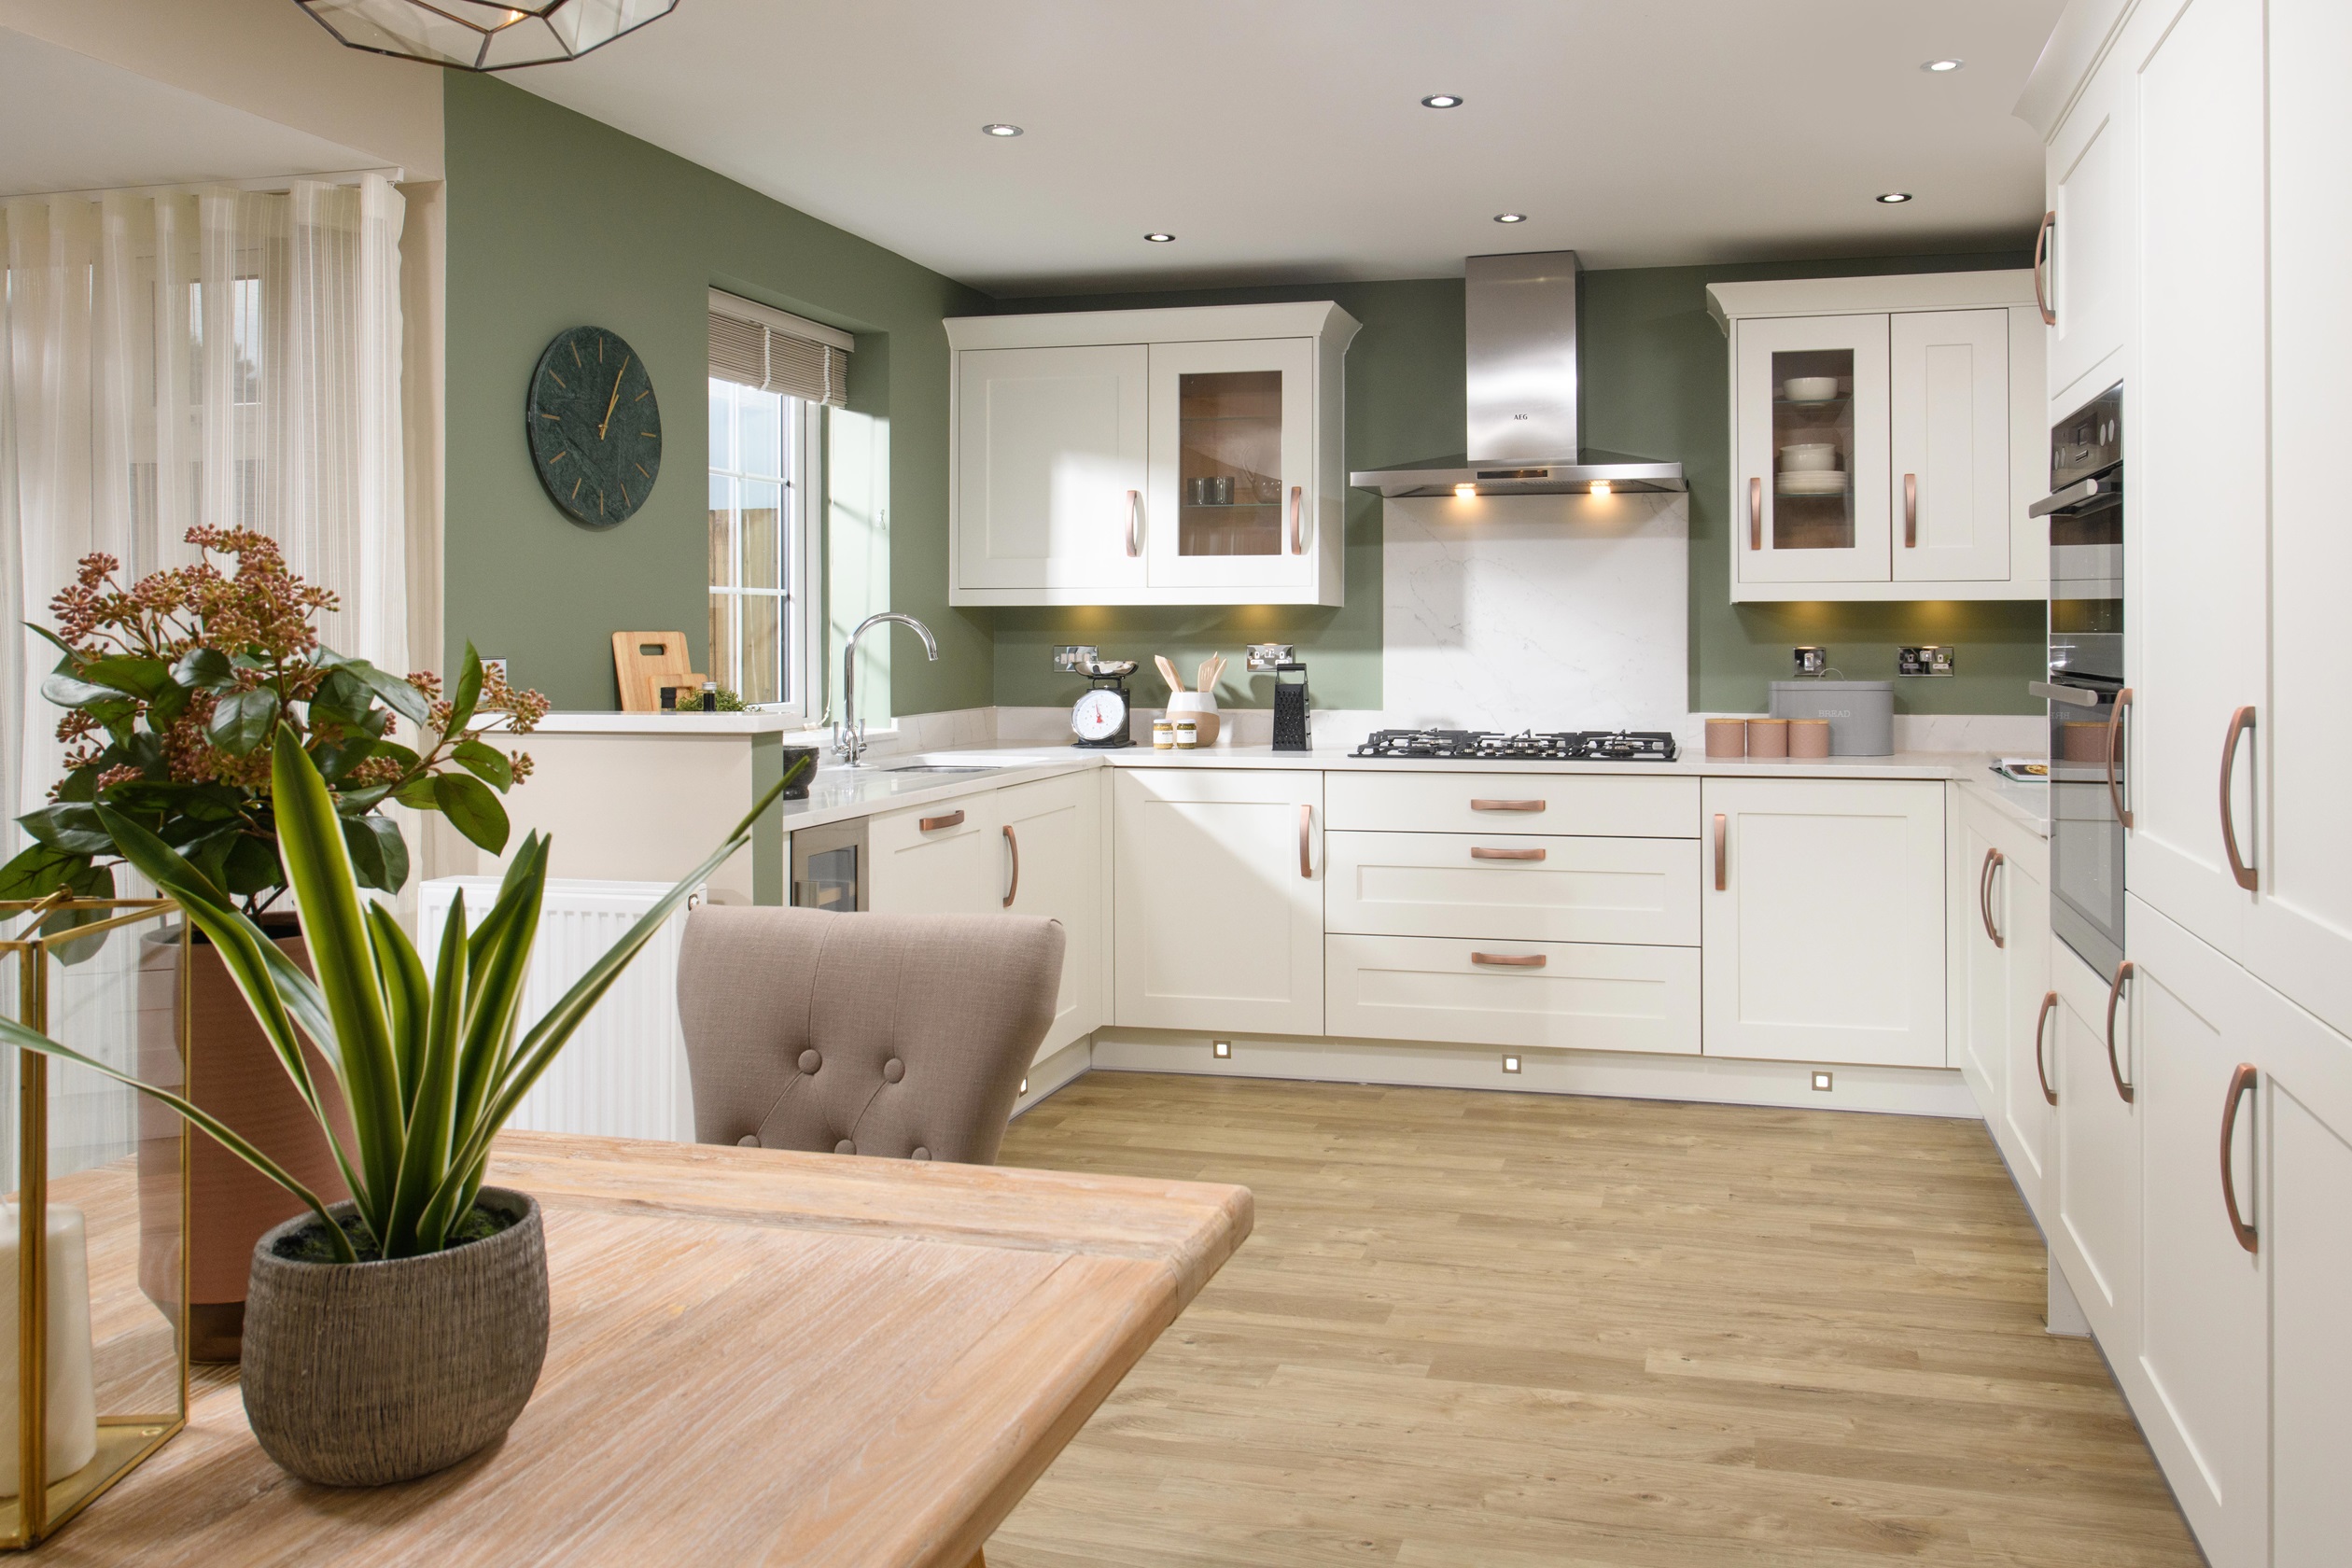 Property 2 of 10. Internal Kitchen Image Of The Holden Oughtibridge Valley